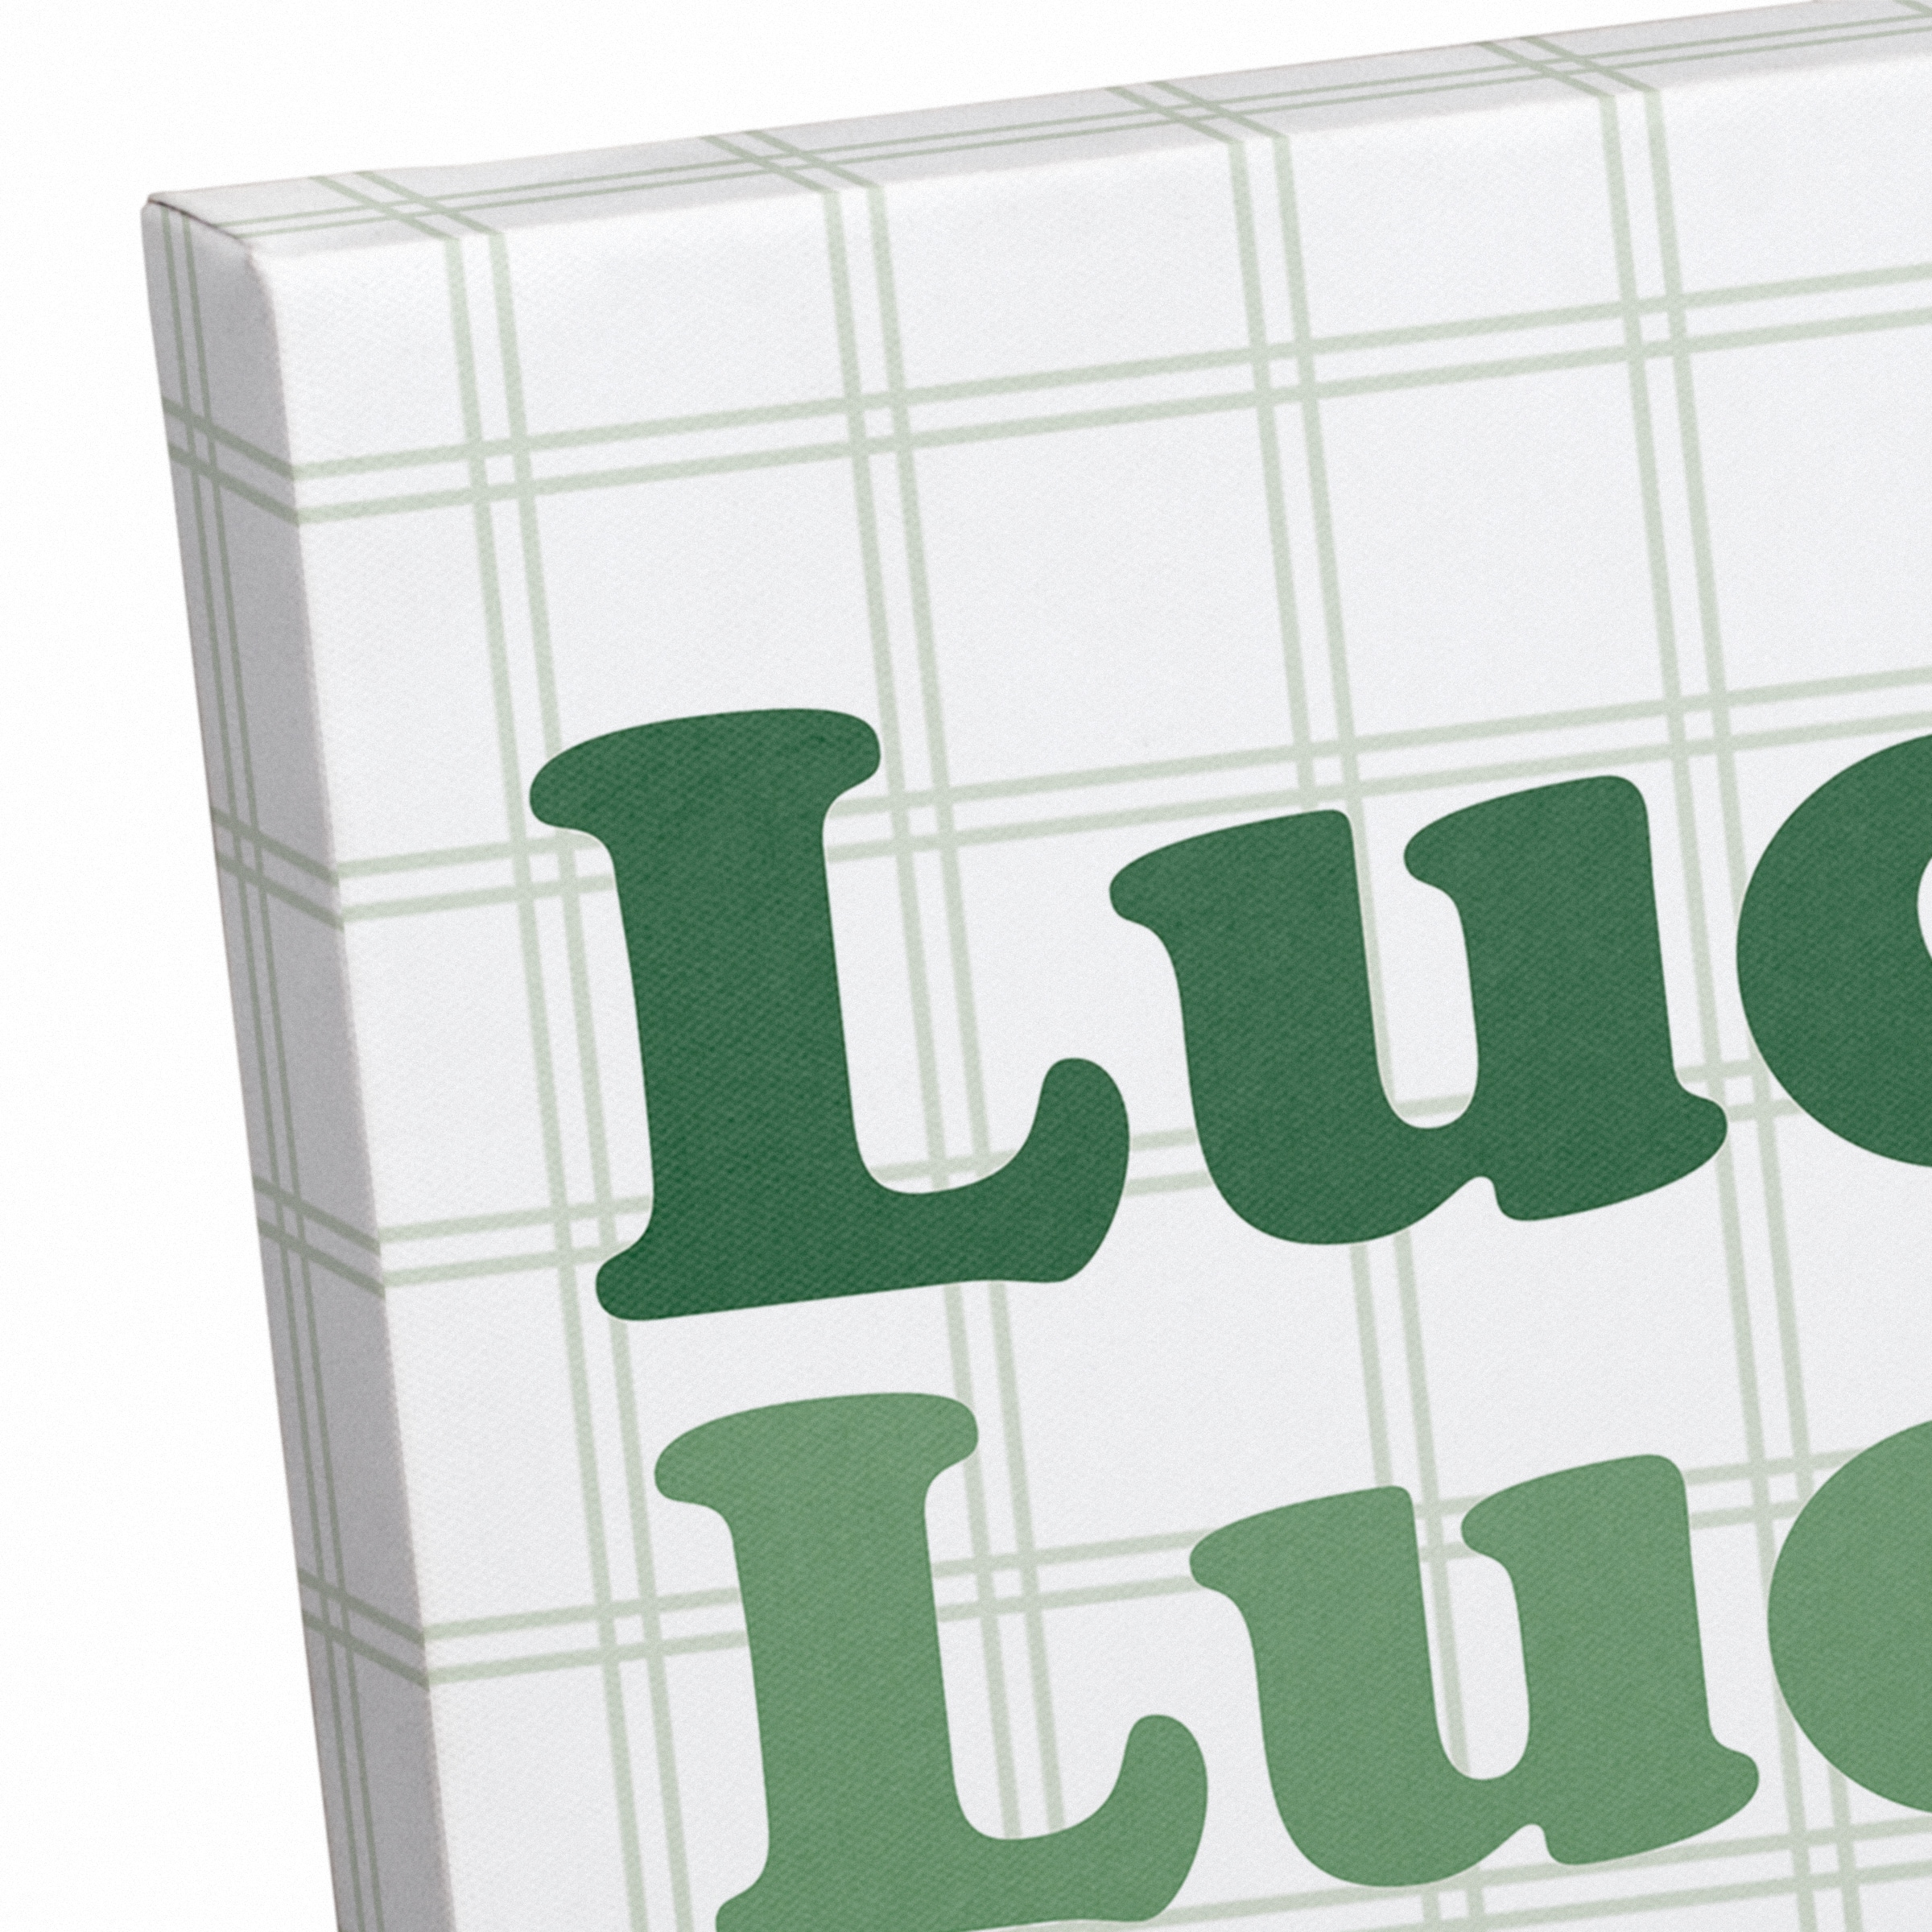 Lucky Stack Canvas Wall Art